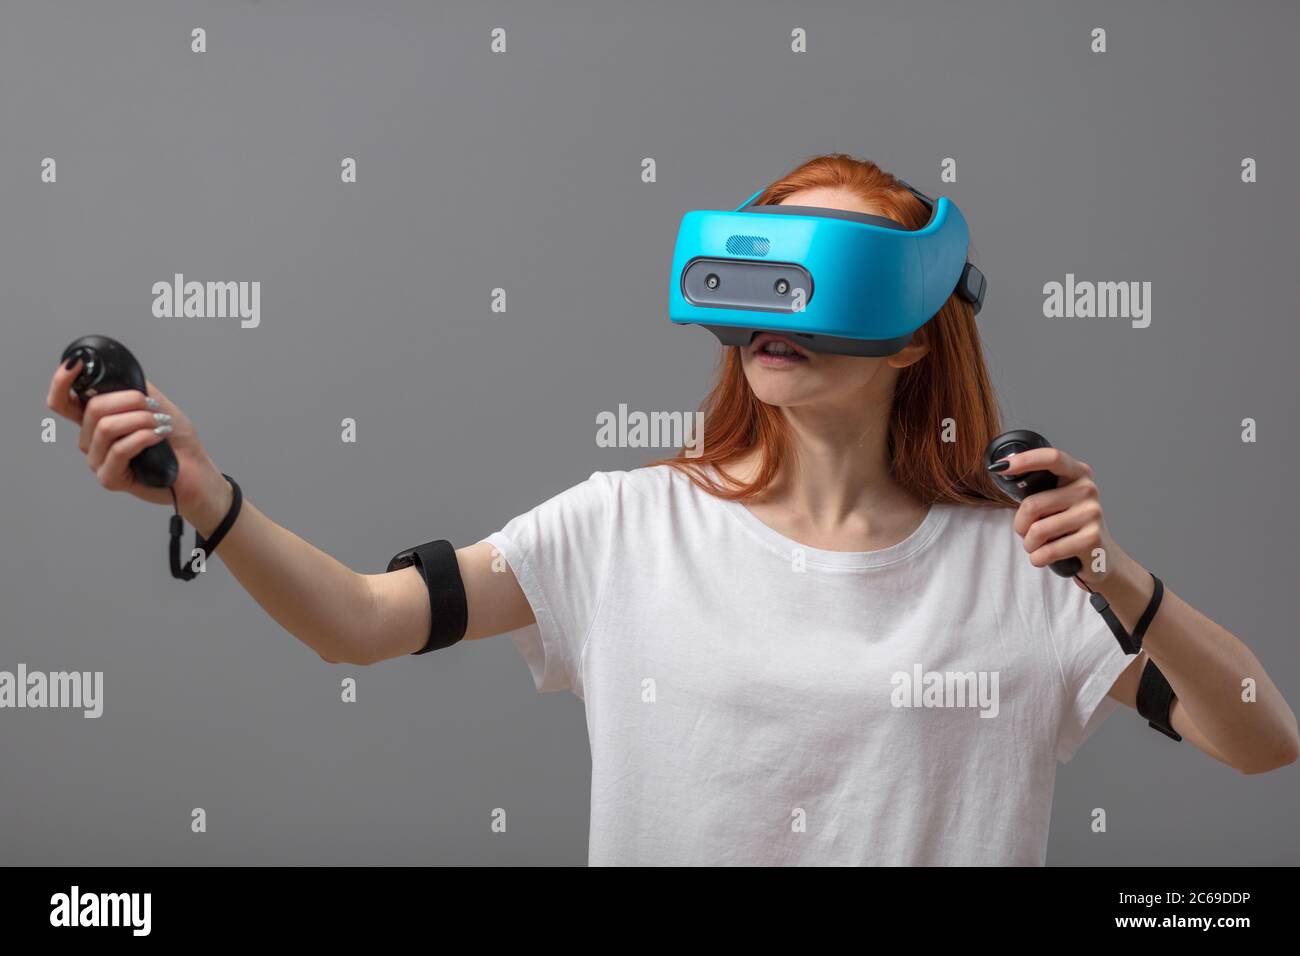 Young woman having fun with new trends innovation technology - Gaming  concept - Isolated studio shot of redhead woman with blue mobile vr headset  Futu Stock Photo - Alamy